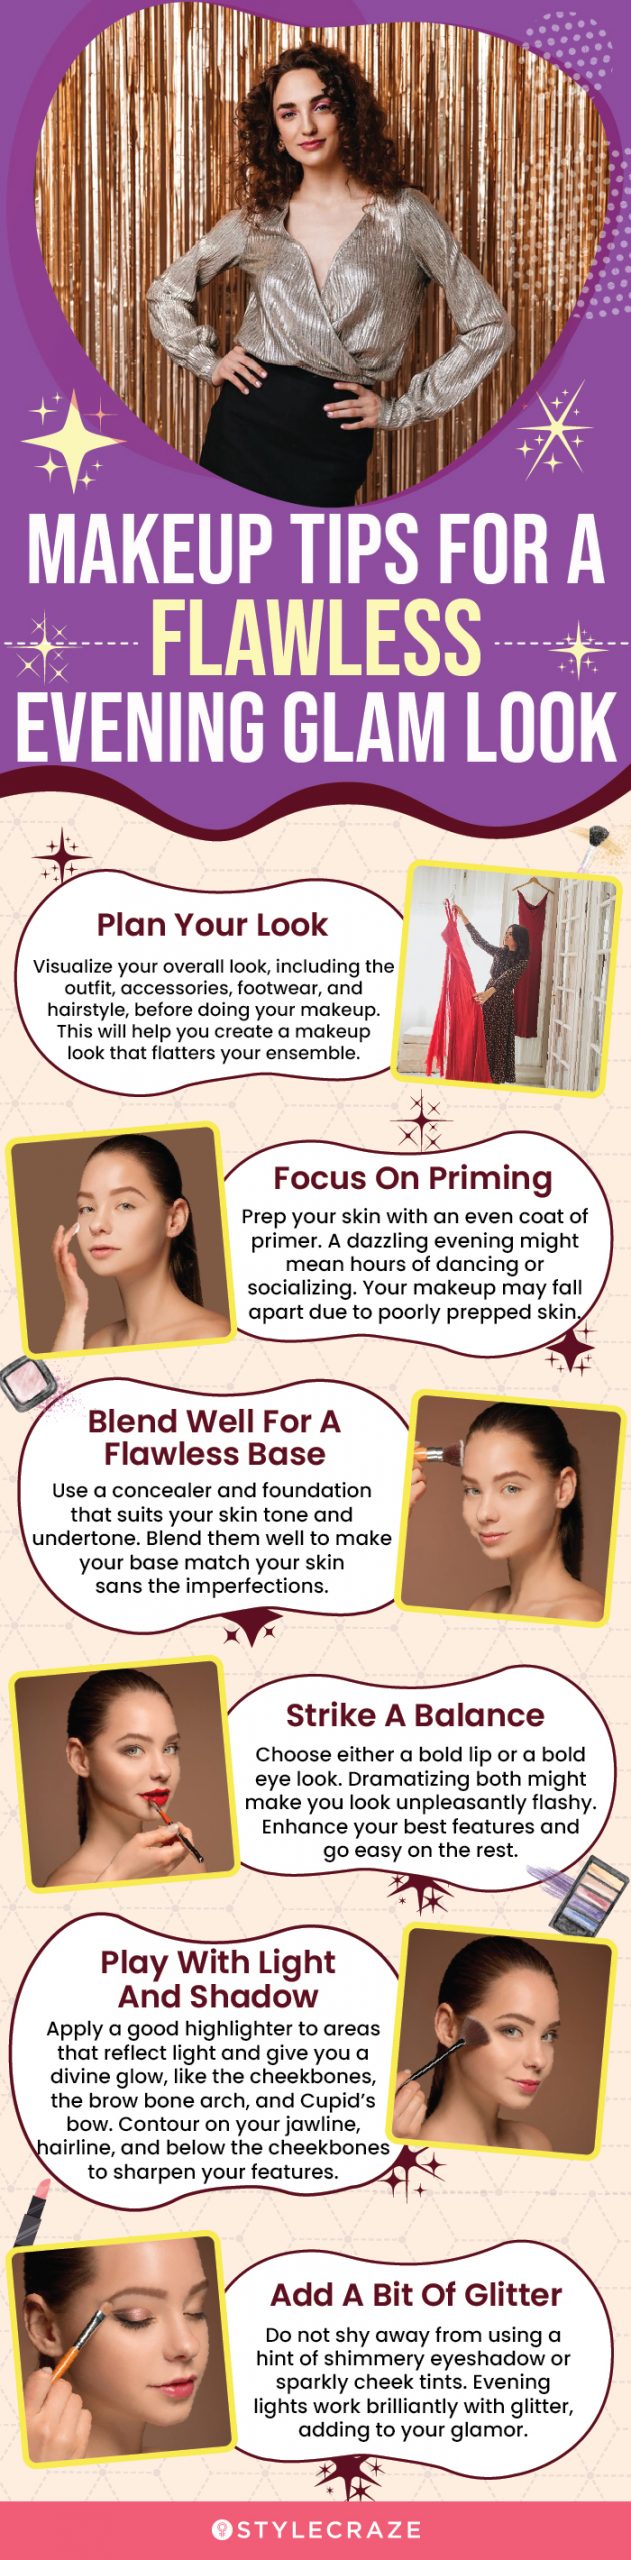 makeup tips for a flawless evening glam look (infographic)